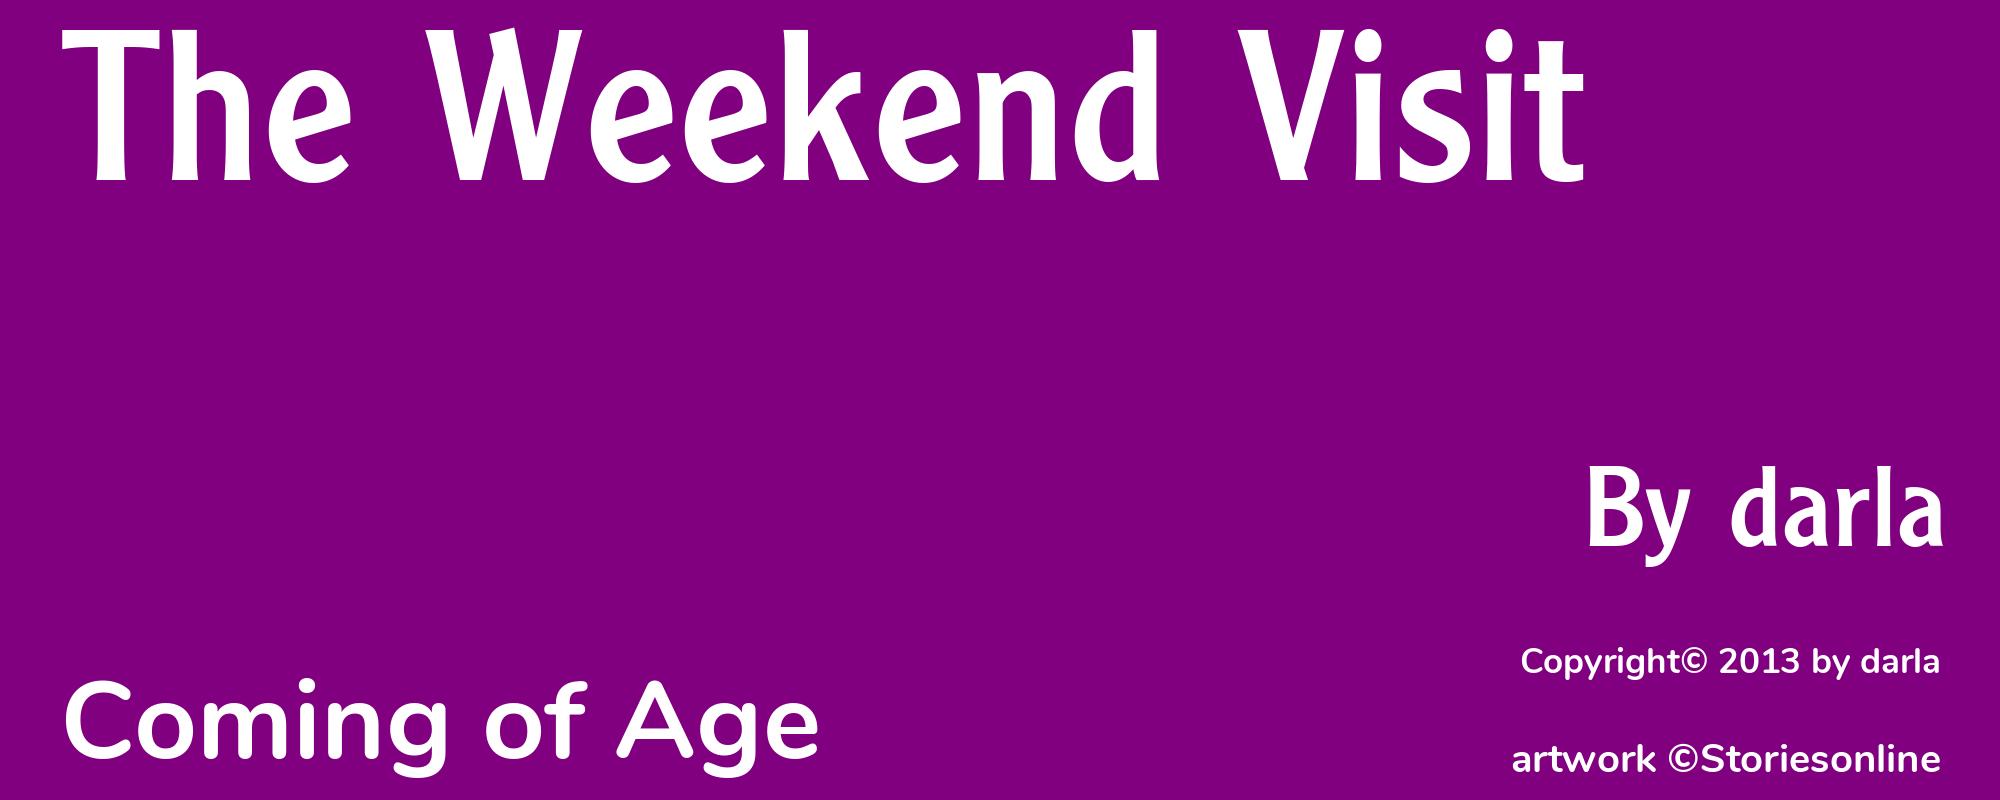 The Weekend Visit - Cover